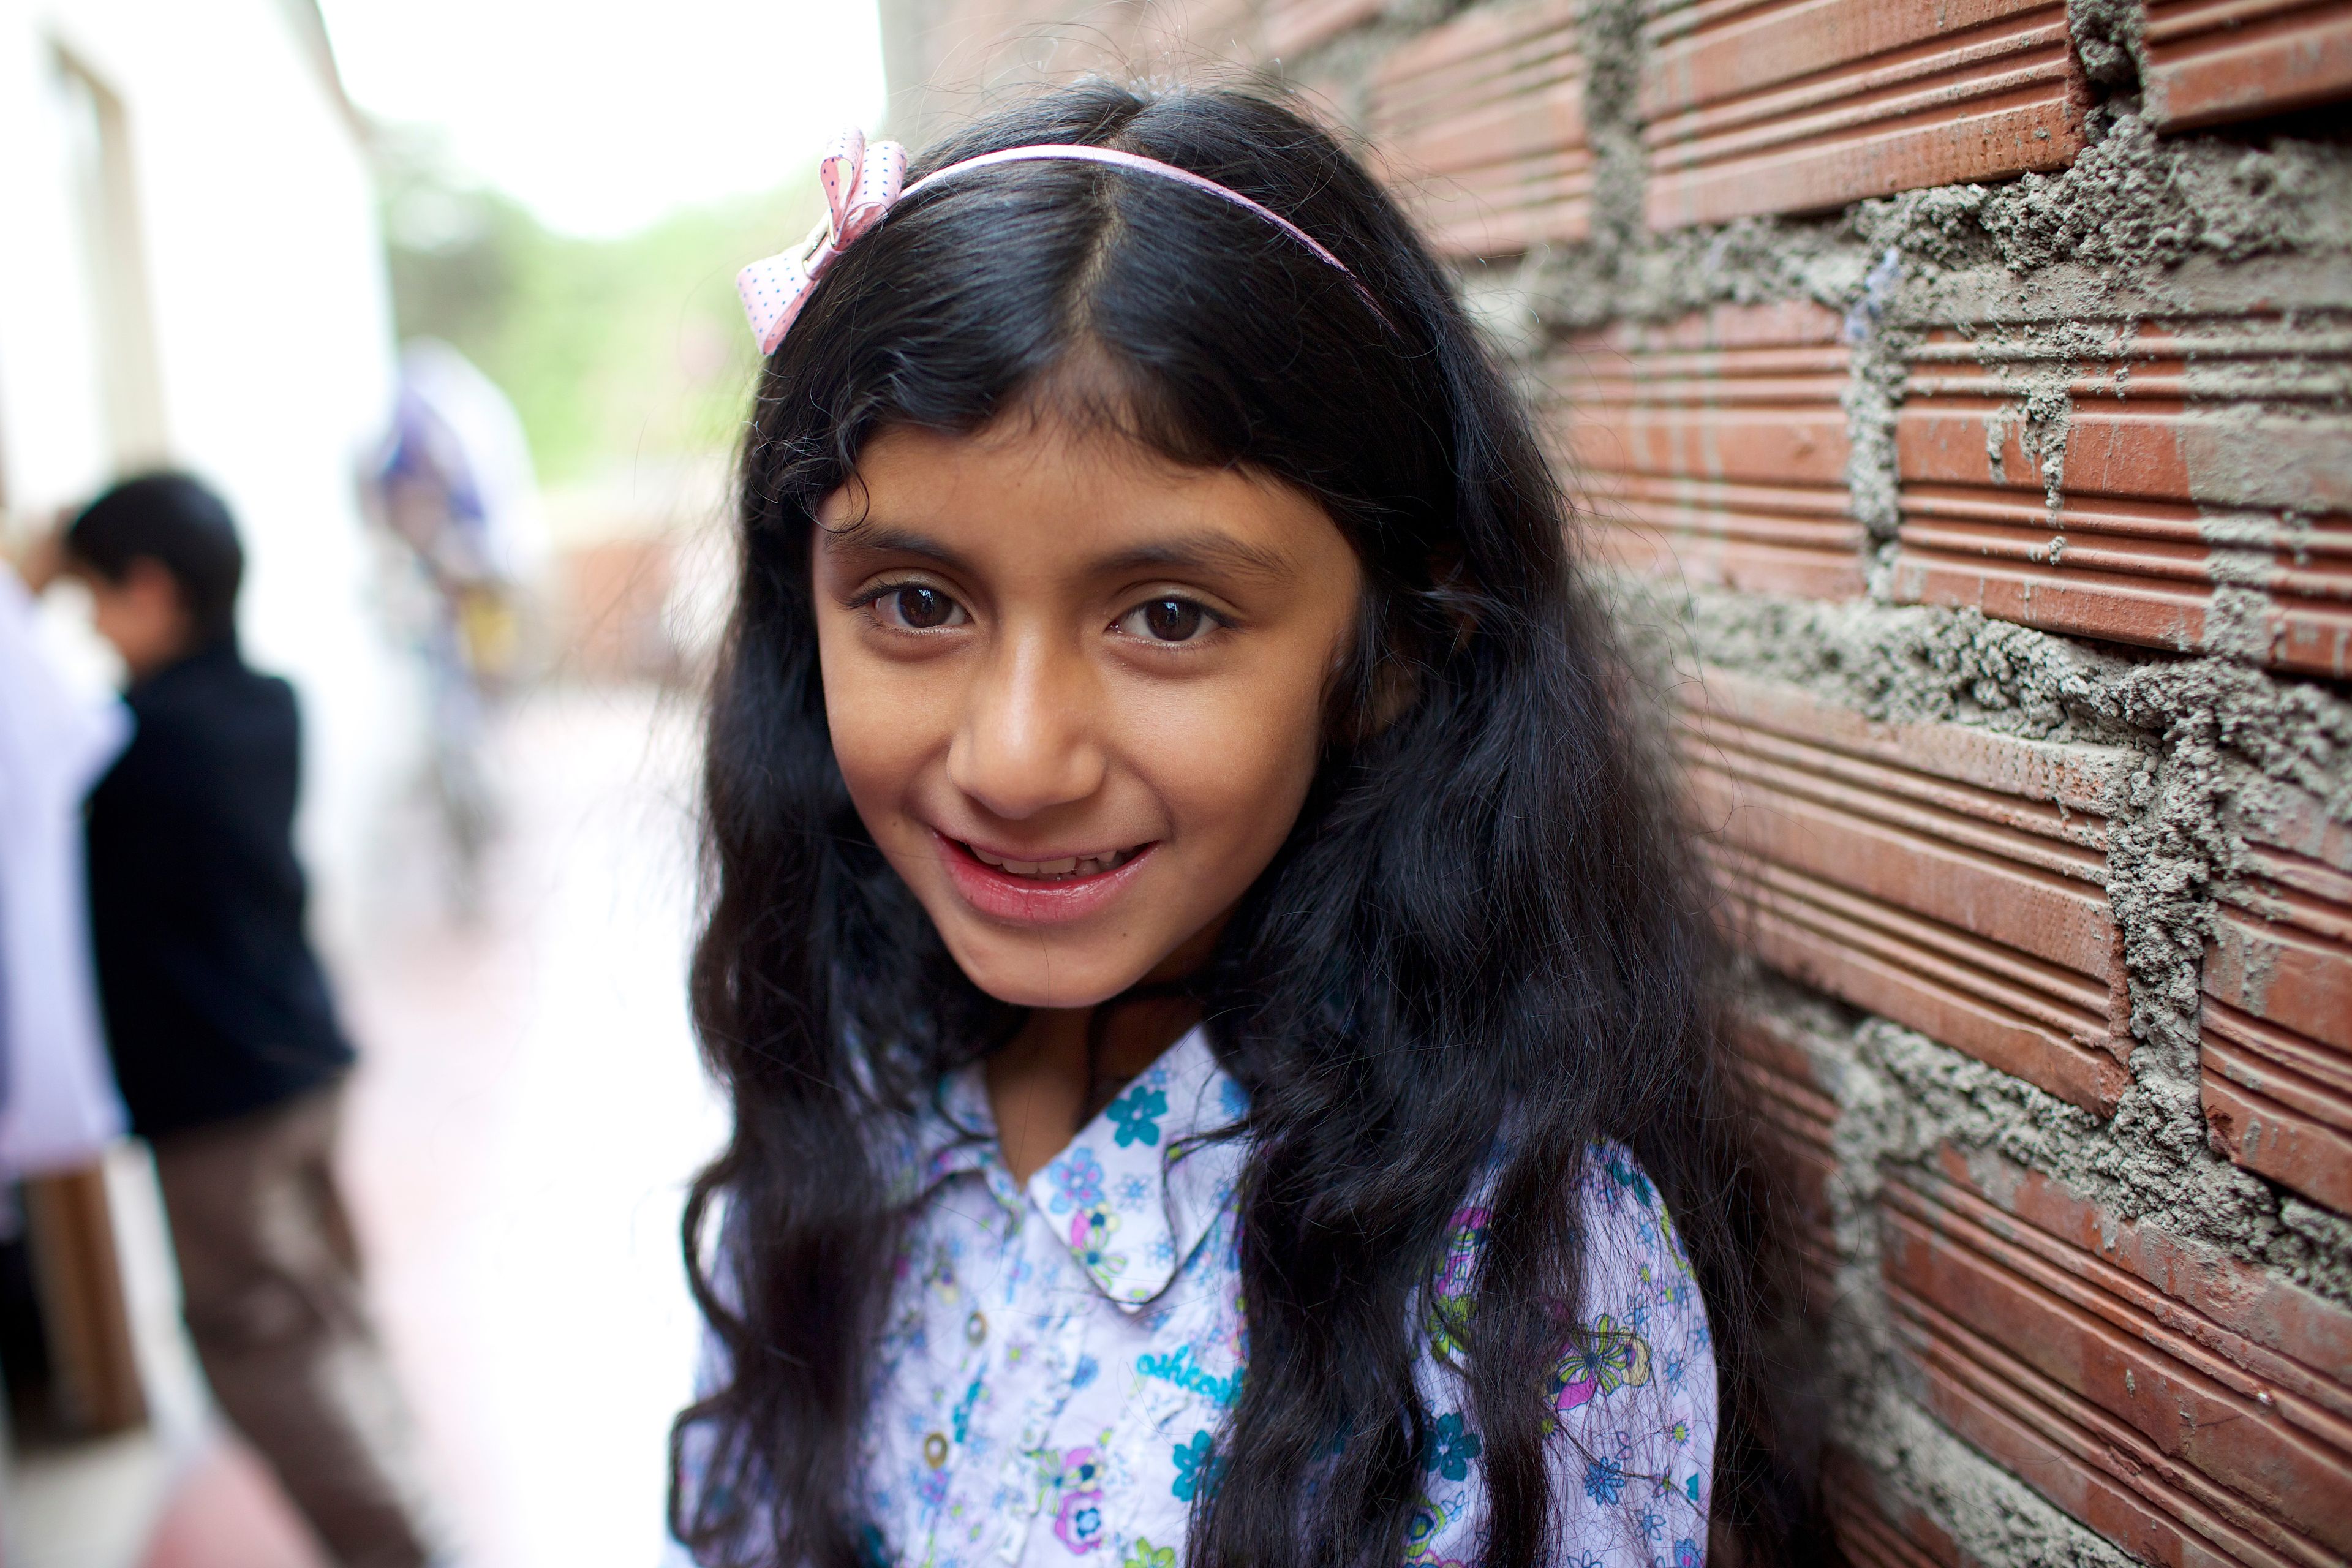 A portrait of a young girl in Peru.